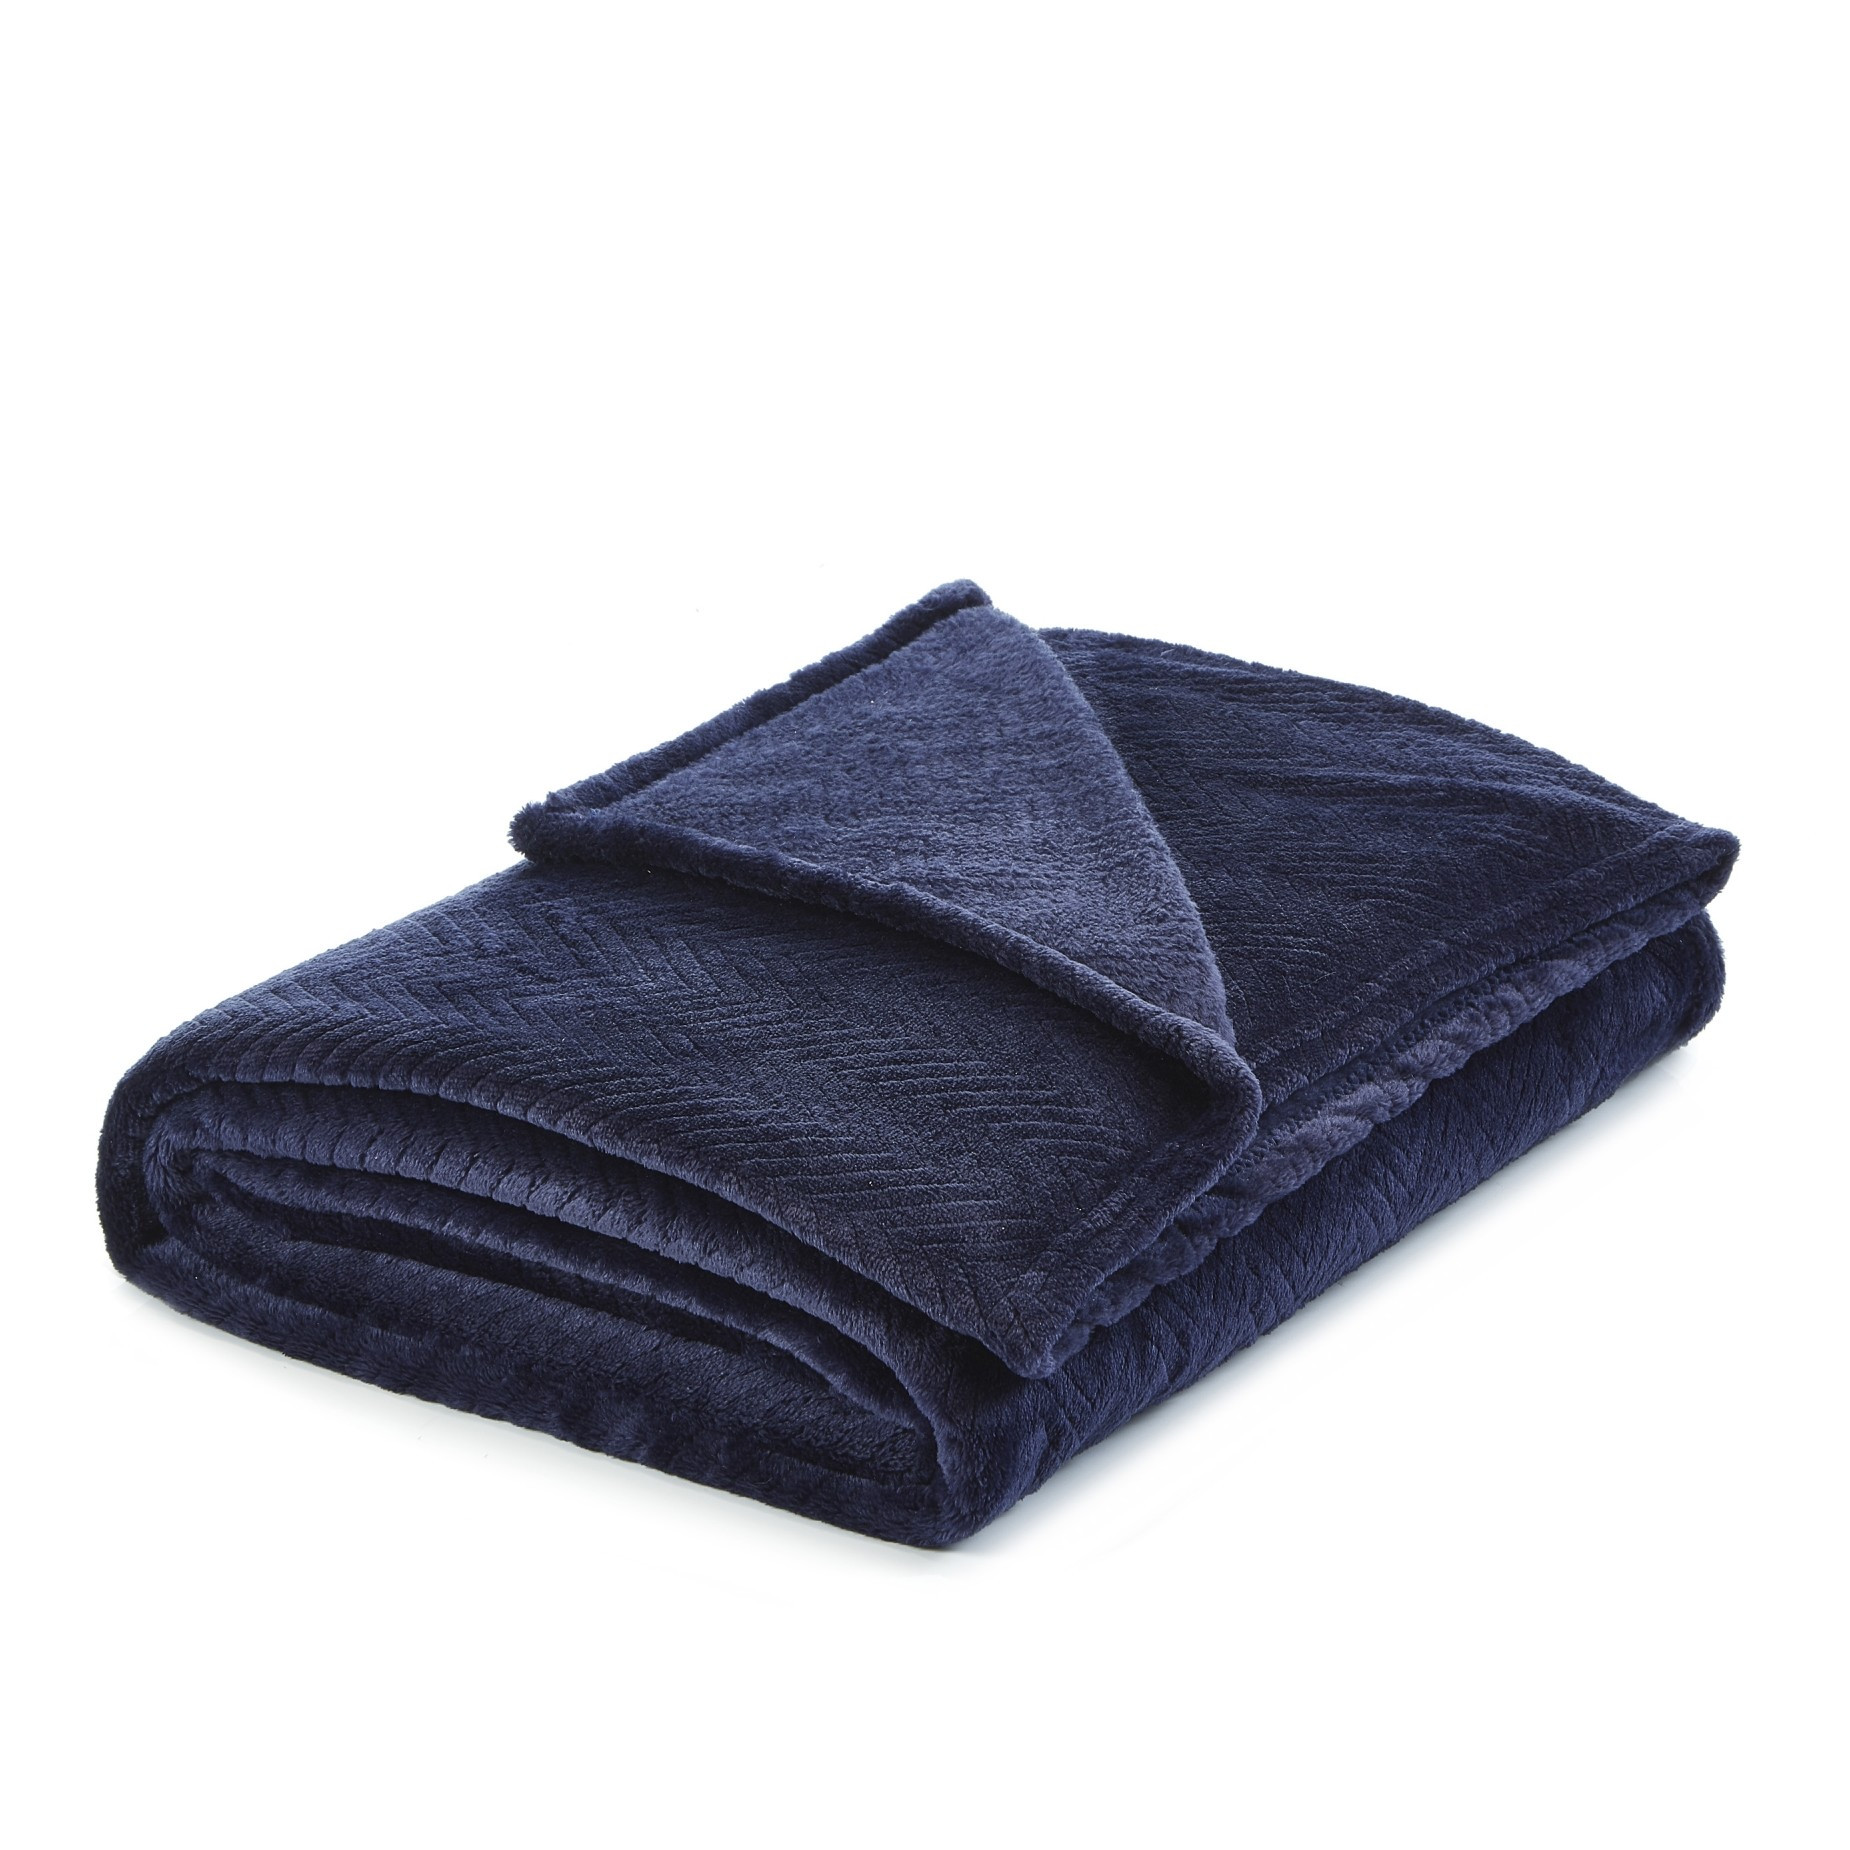 Navy Blue Knitted PolYester Solid Color Plush Throw Blanket-531225-1